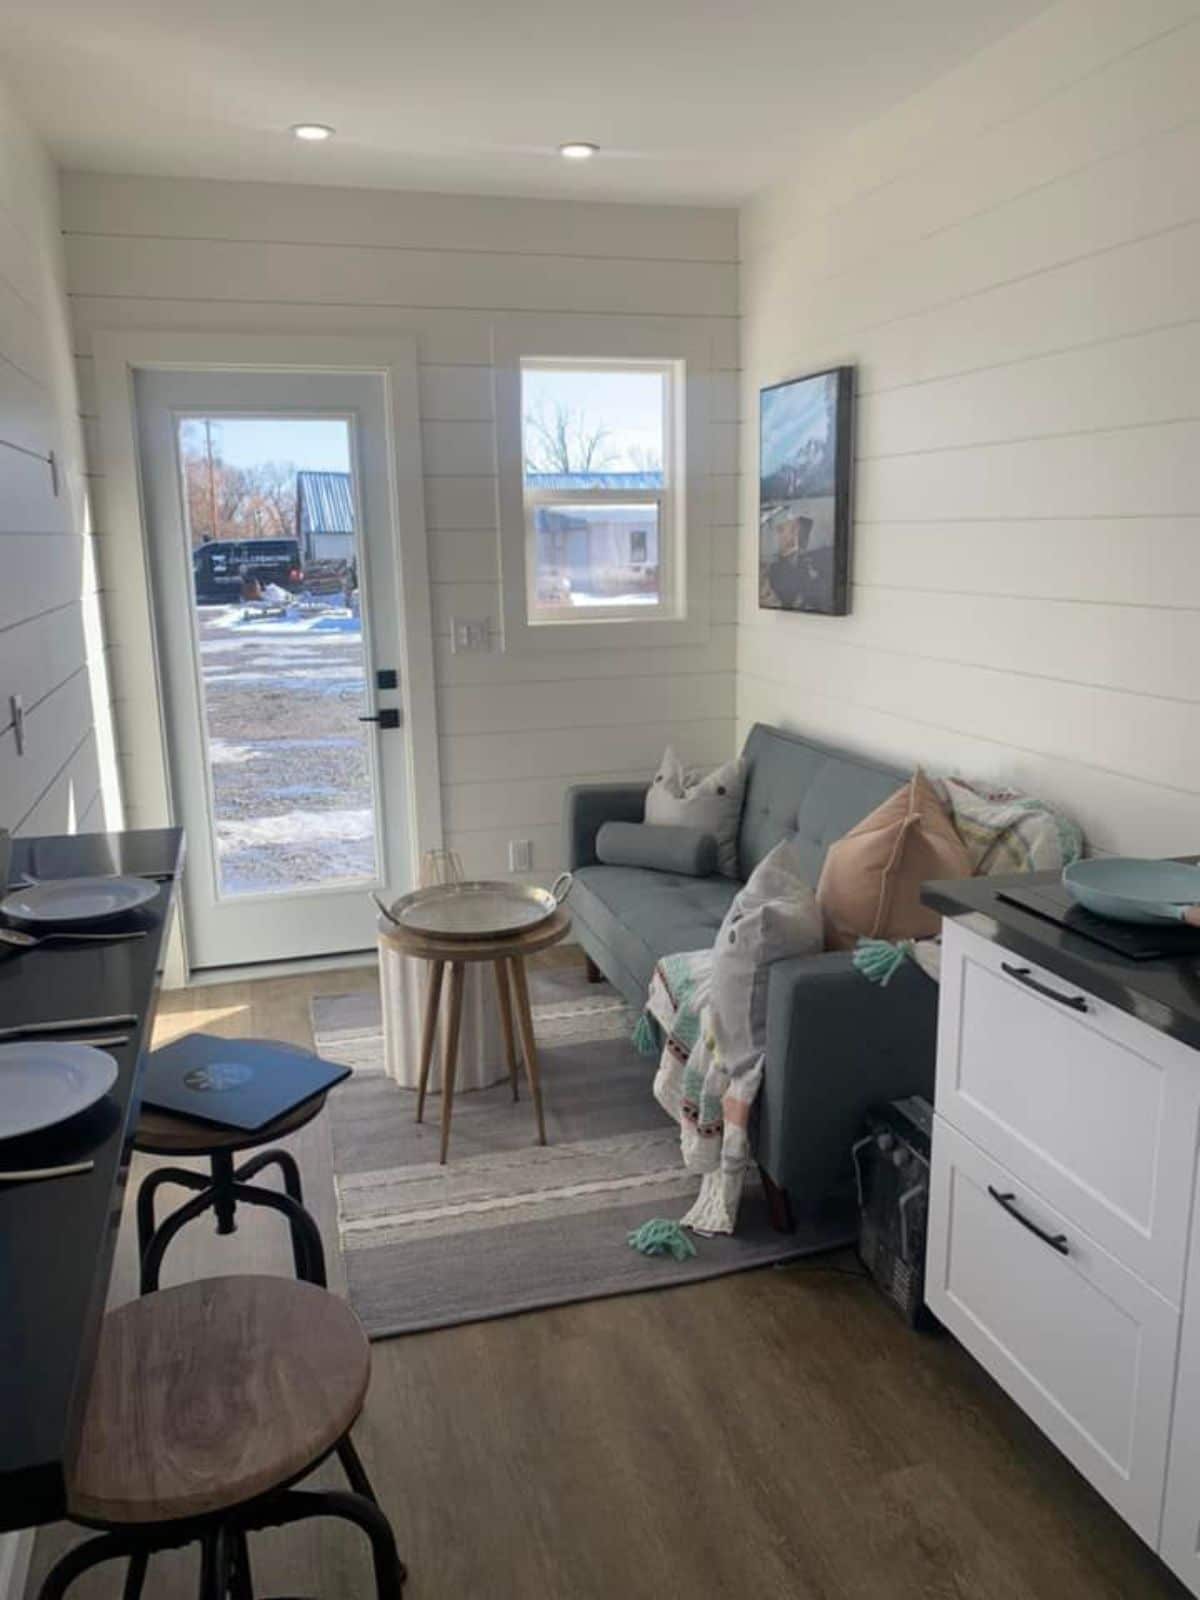 Beautifully designed and well equipped tiny cabin can be your tiny house or workspace